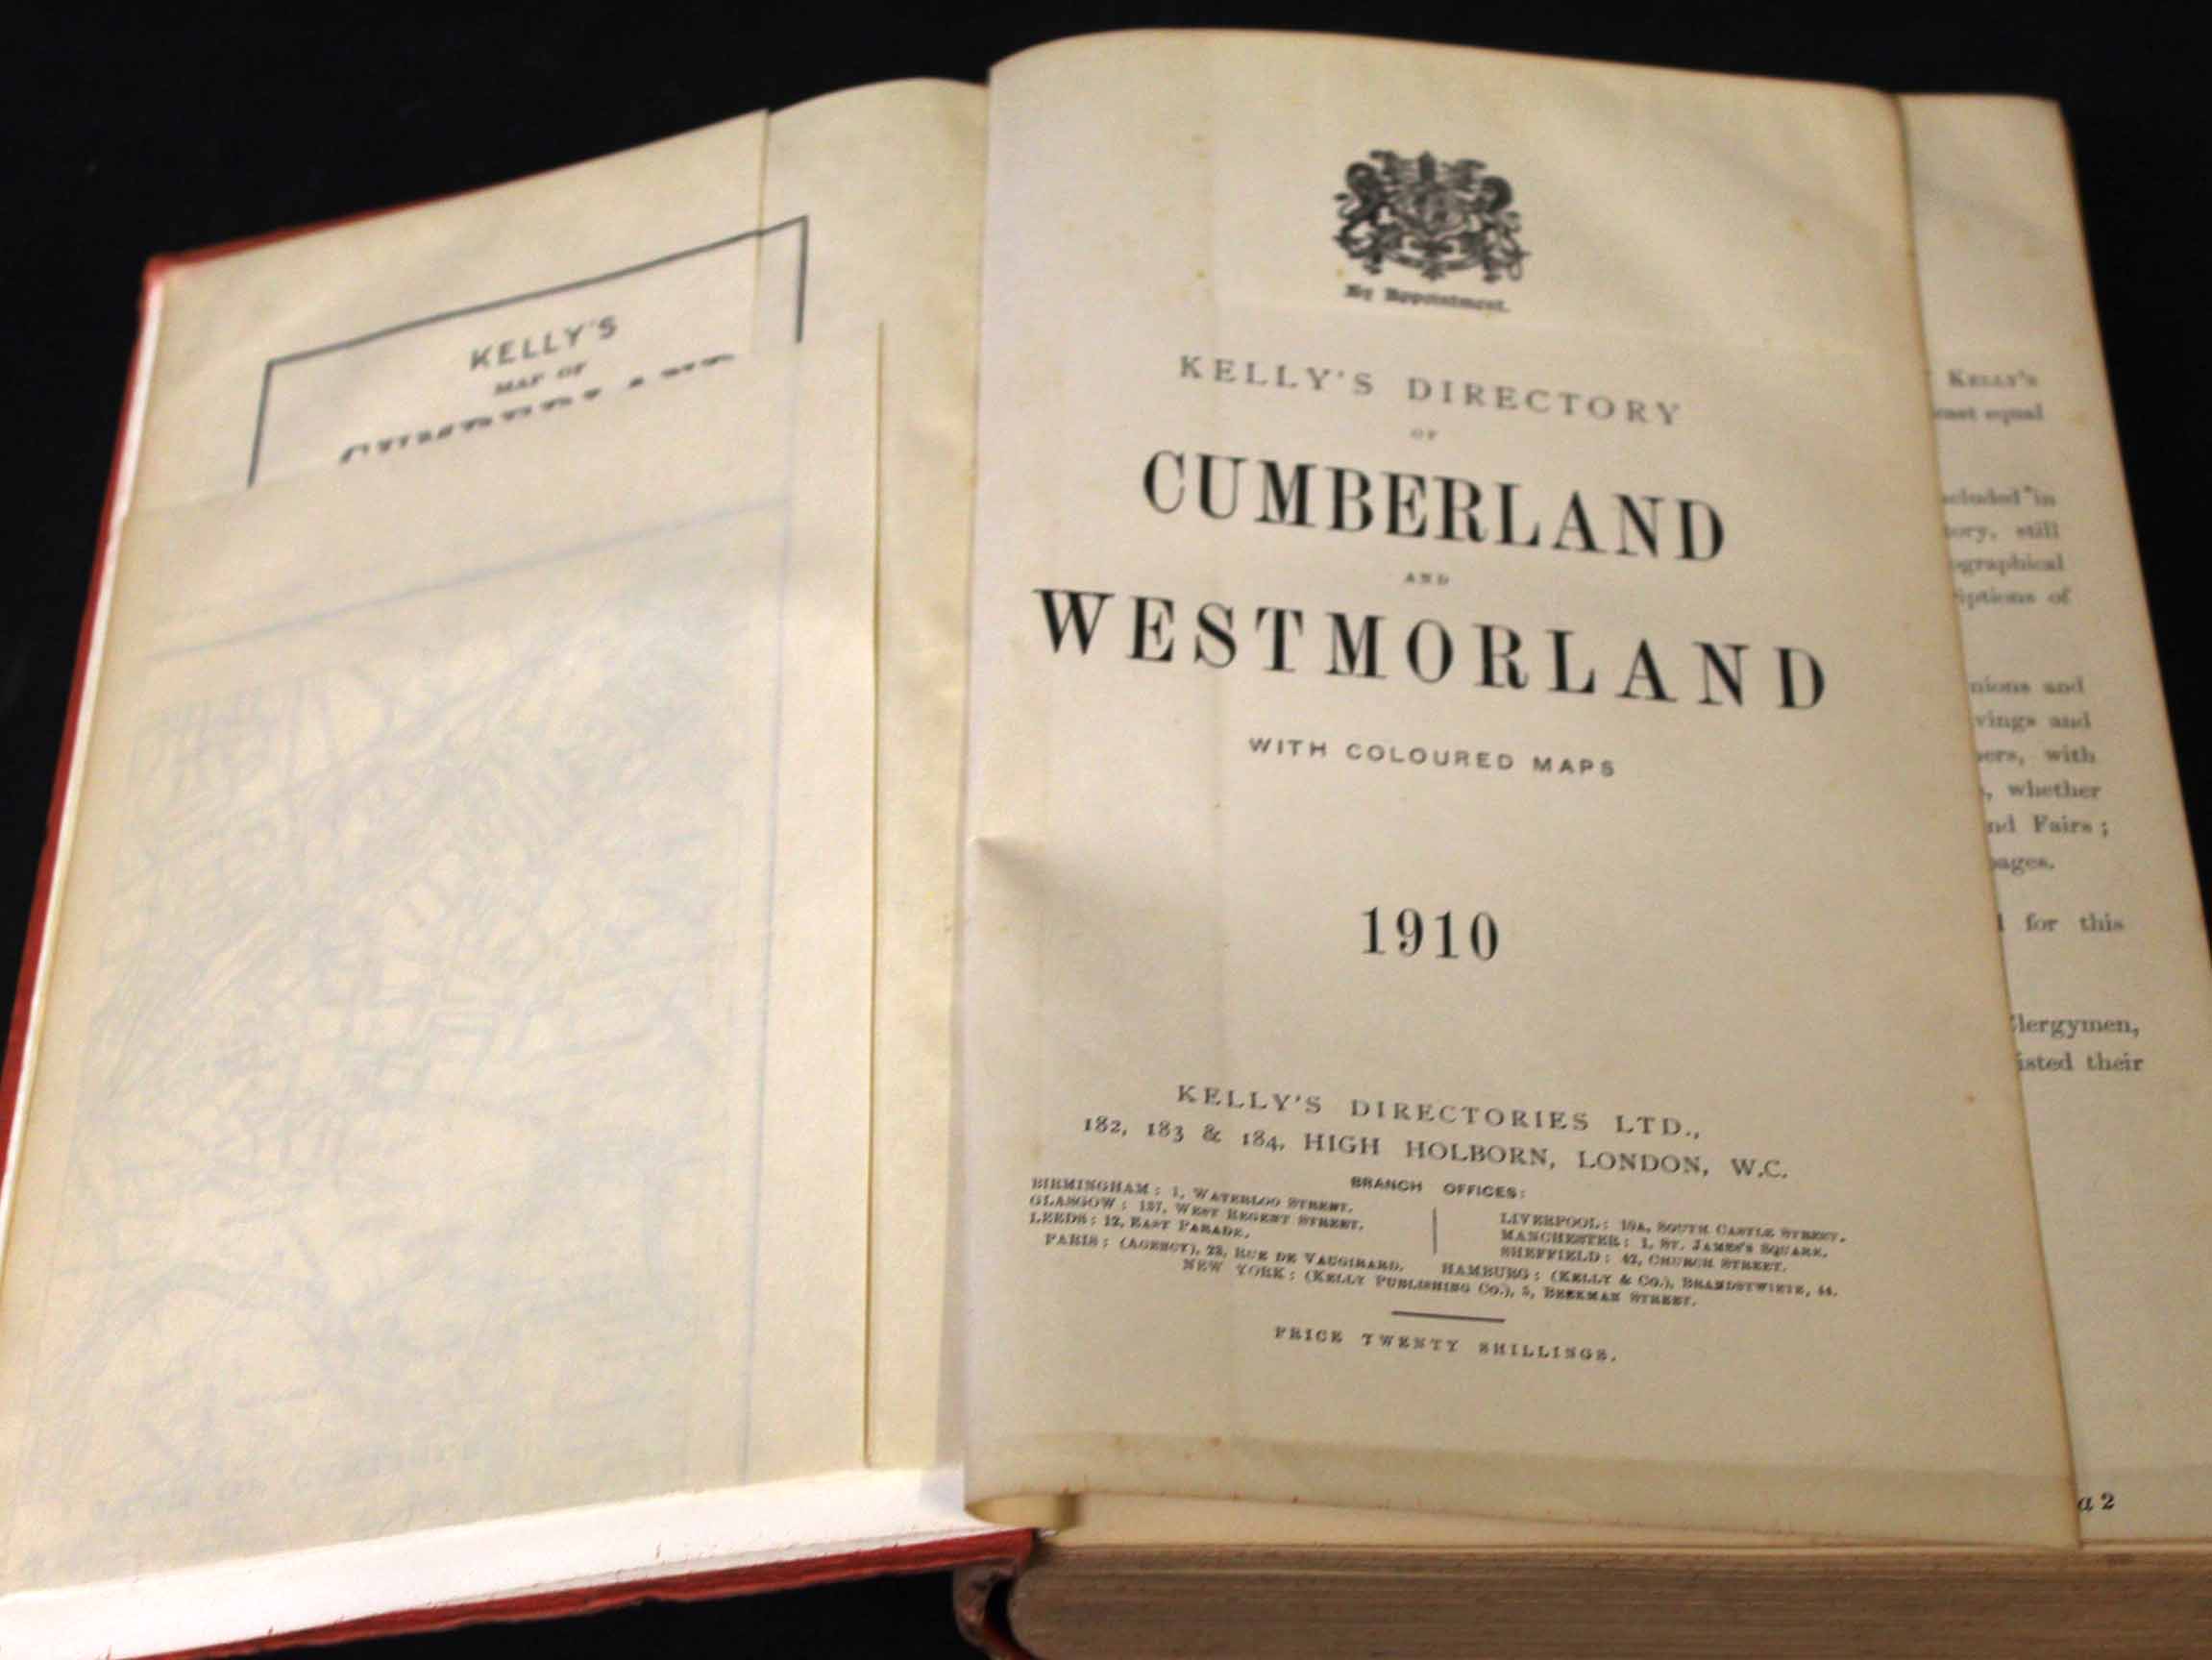 KELLY'S DIRECTORY OF CUMBERLAND AND WESTMORLAND, 1910, 2 folding maps, original blind stamped